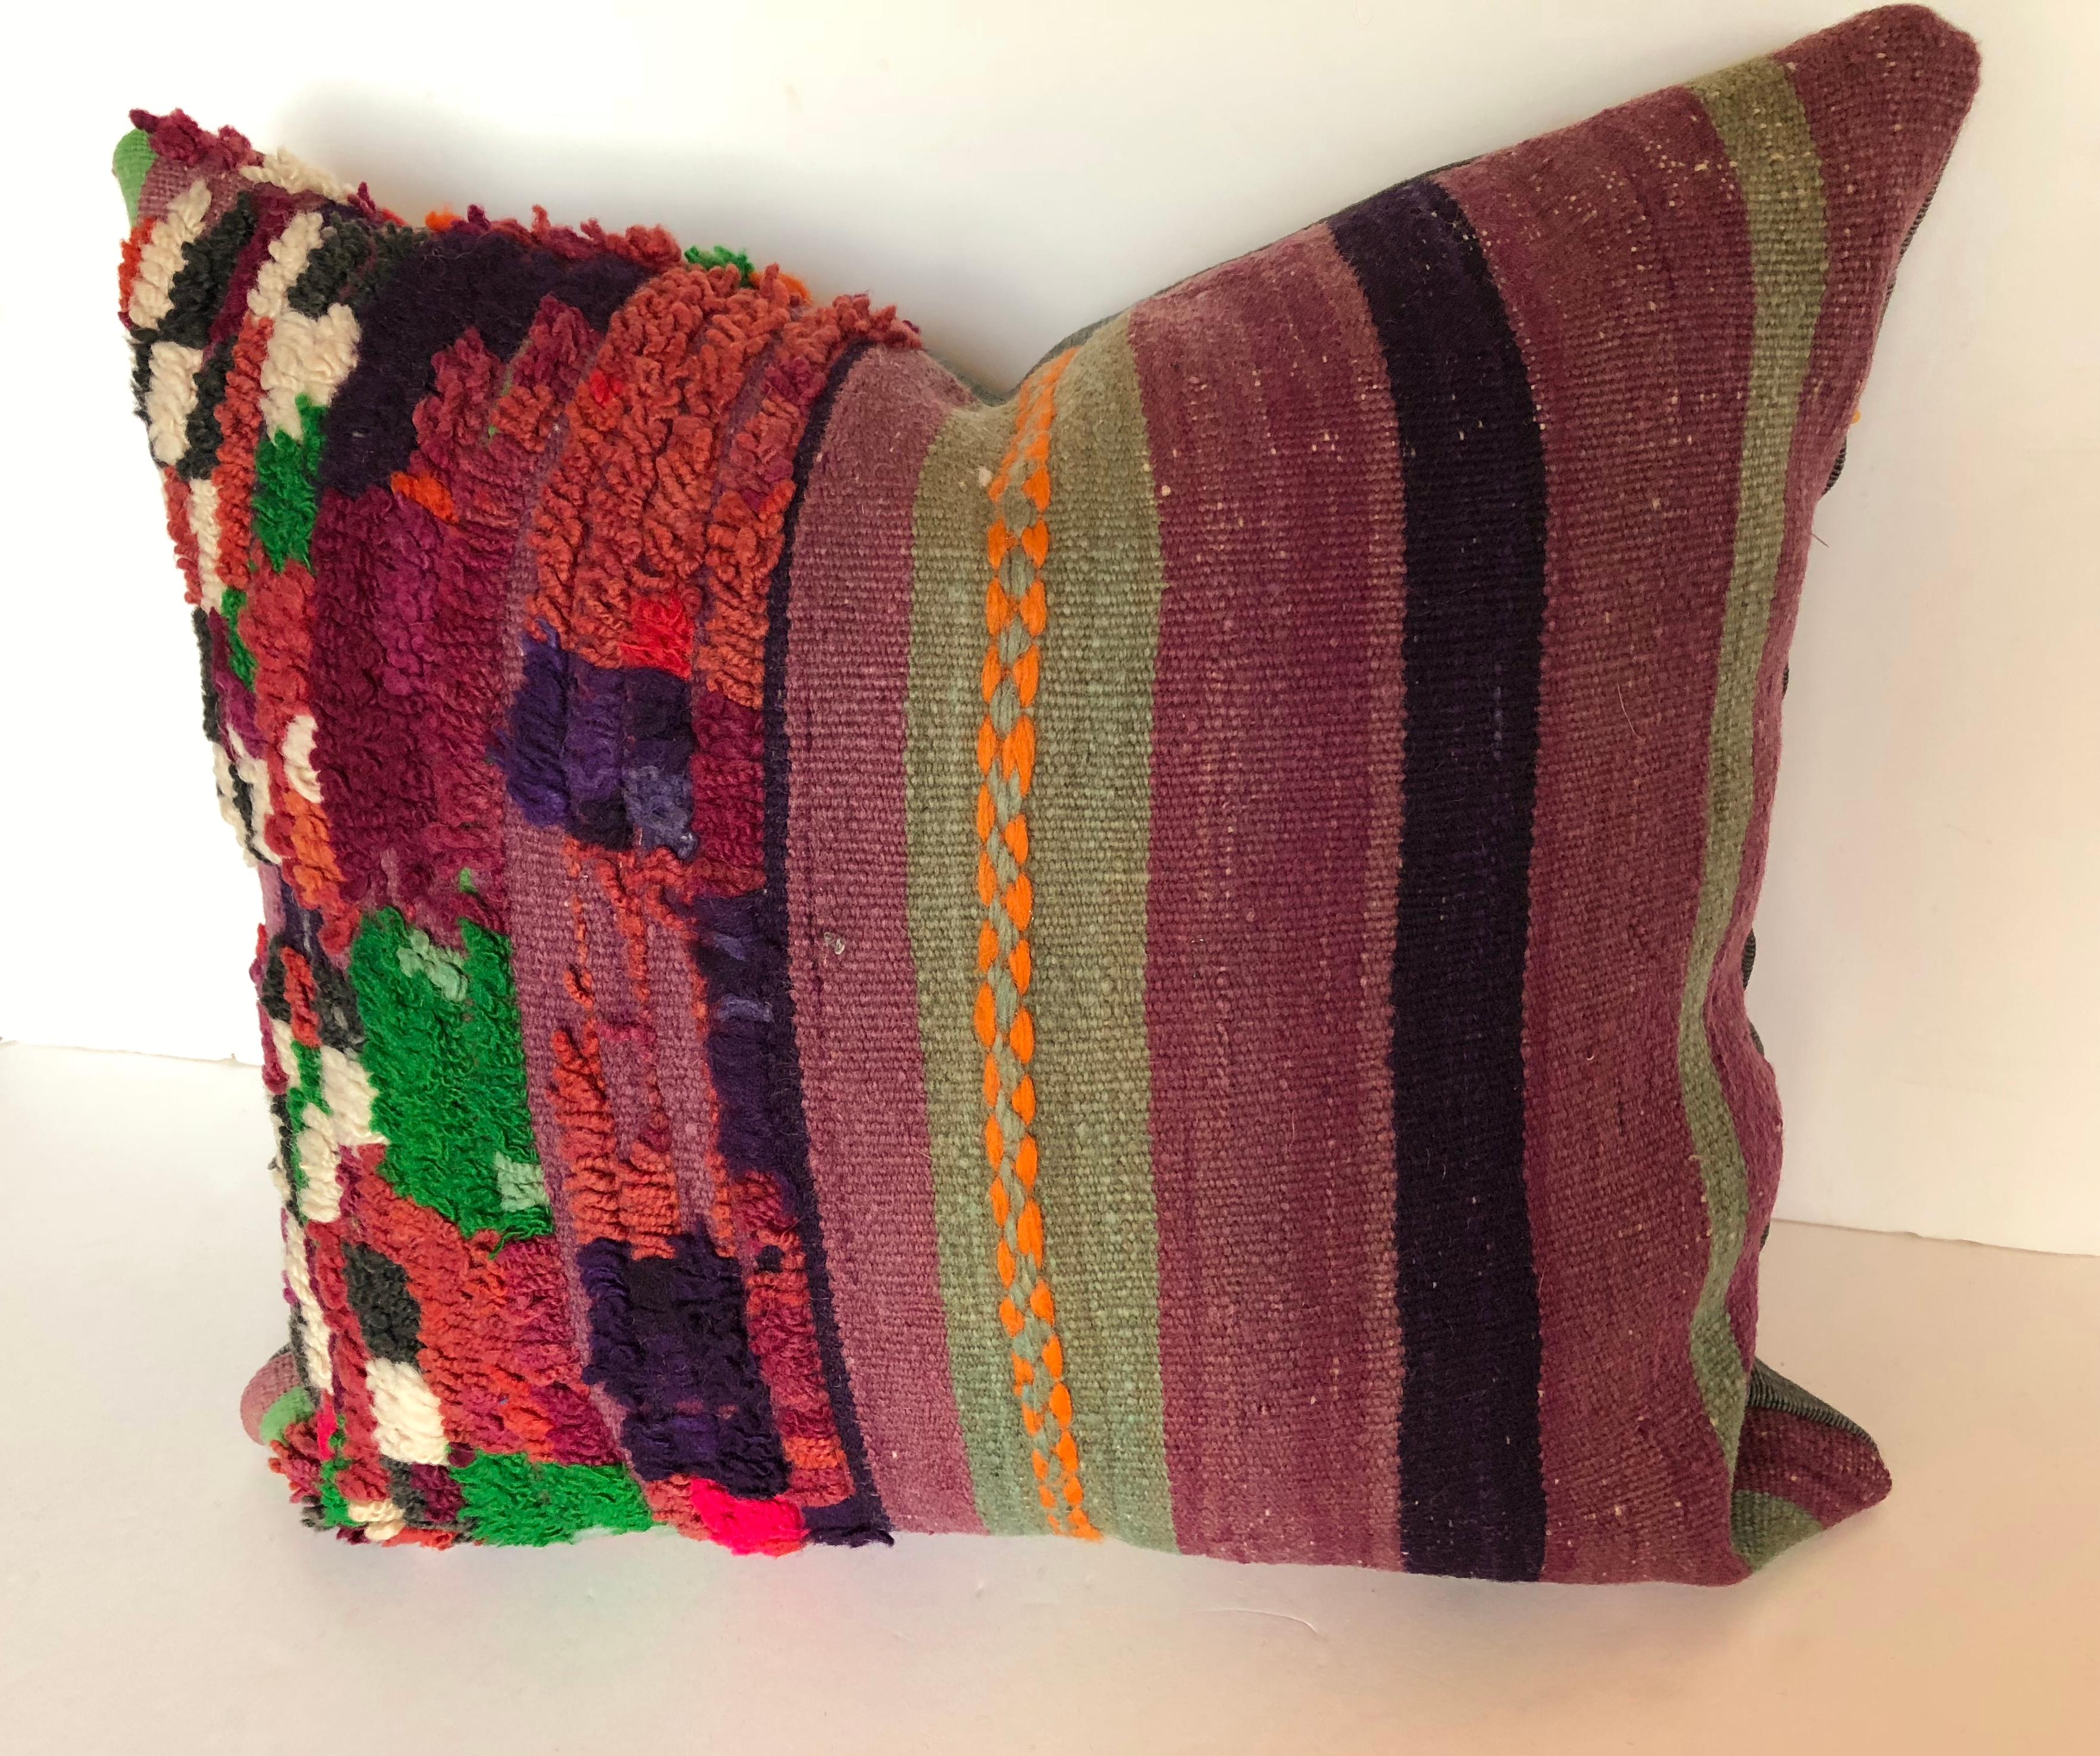 Custom pillow cut from a vintage hand-loomed wool Moroccan rug from the Atlas Mountains. Stripes in purple, green and gold with multi colored tufting on a purple base.
Pillow is backed in a dark teal silk, filled with an insert of 50/50 down and